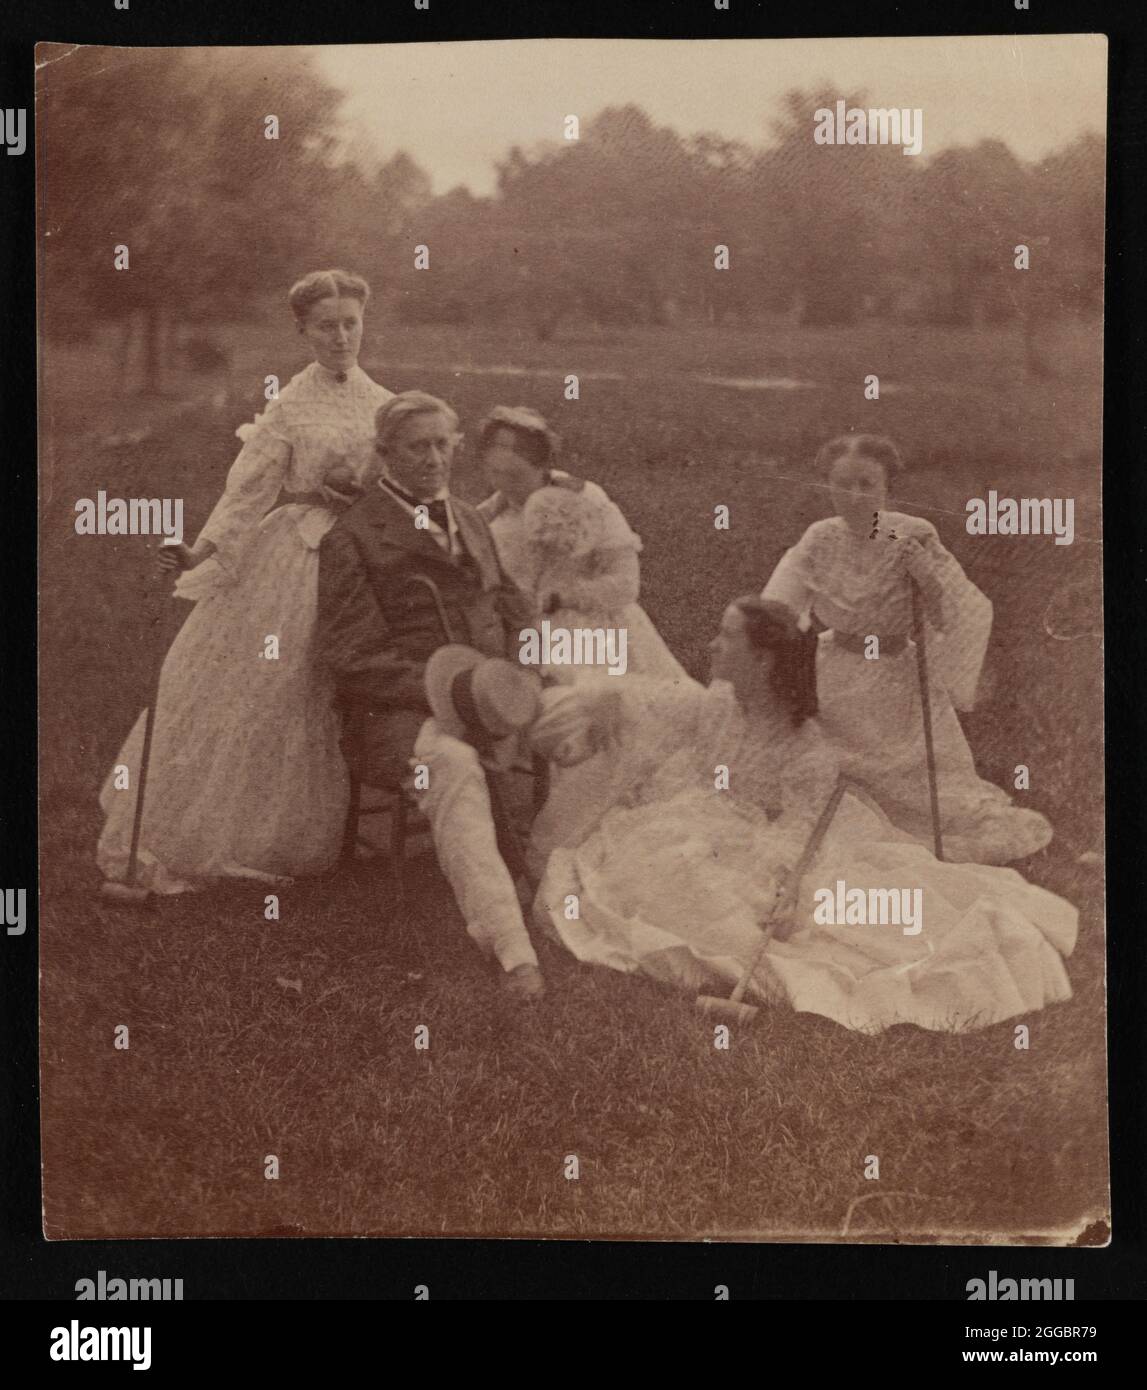 Group portrait of Joseph Henry (1797-1878) and family, circa 1865. Smithsonian secretary Joseph Henry with wife Harriet Alexander Henry, and three daughters, Caroline Henry, Mary Henry, and Helen Louisa Henry, holding croquet mallets on Smithsonian grounds. Stock Photo